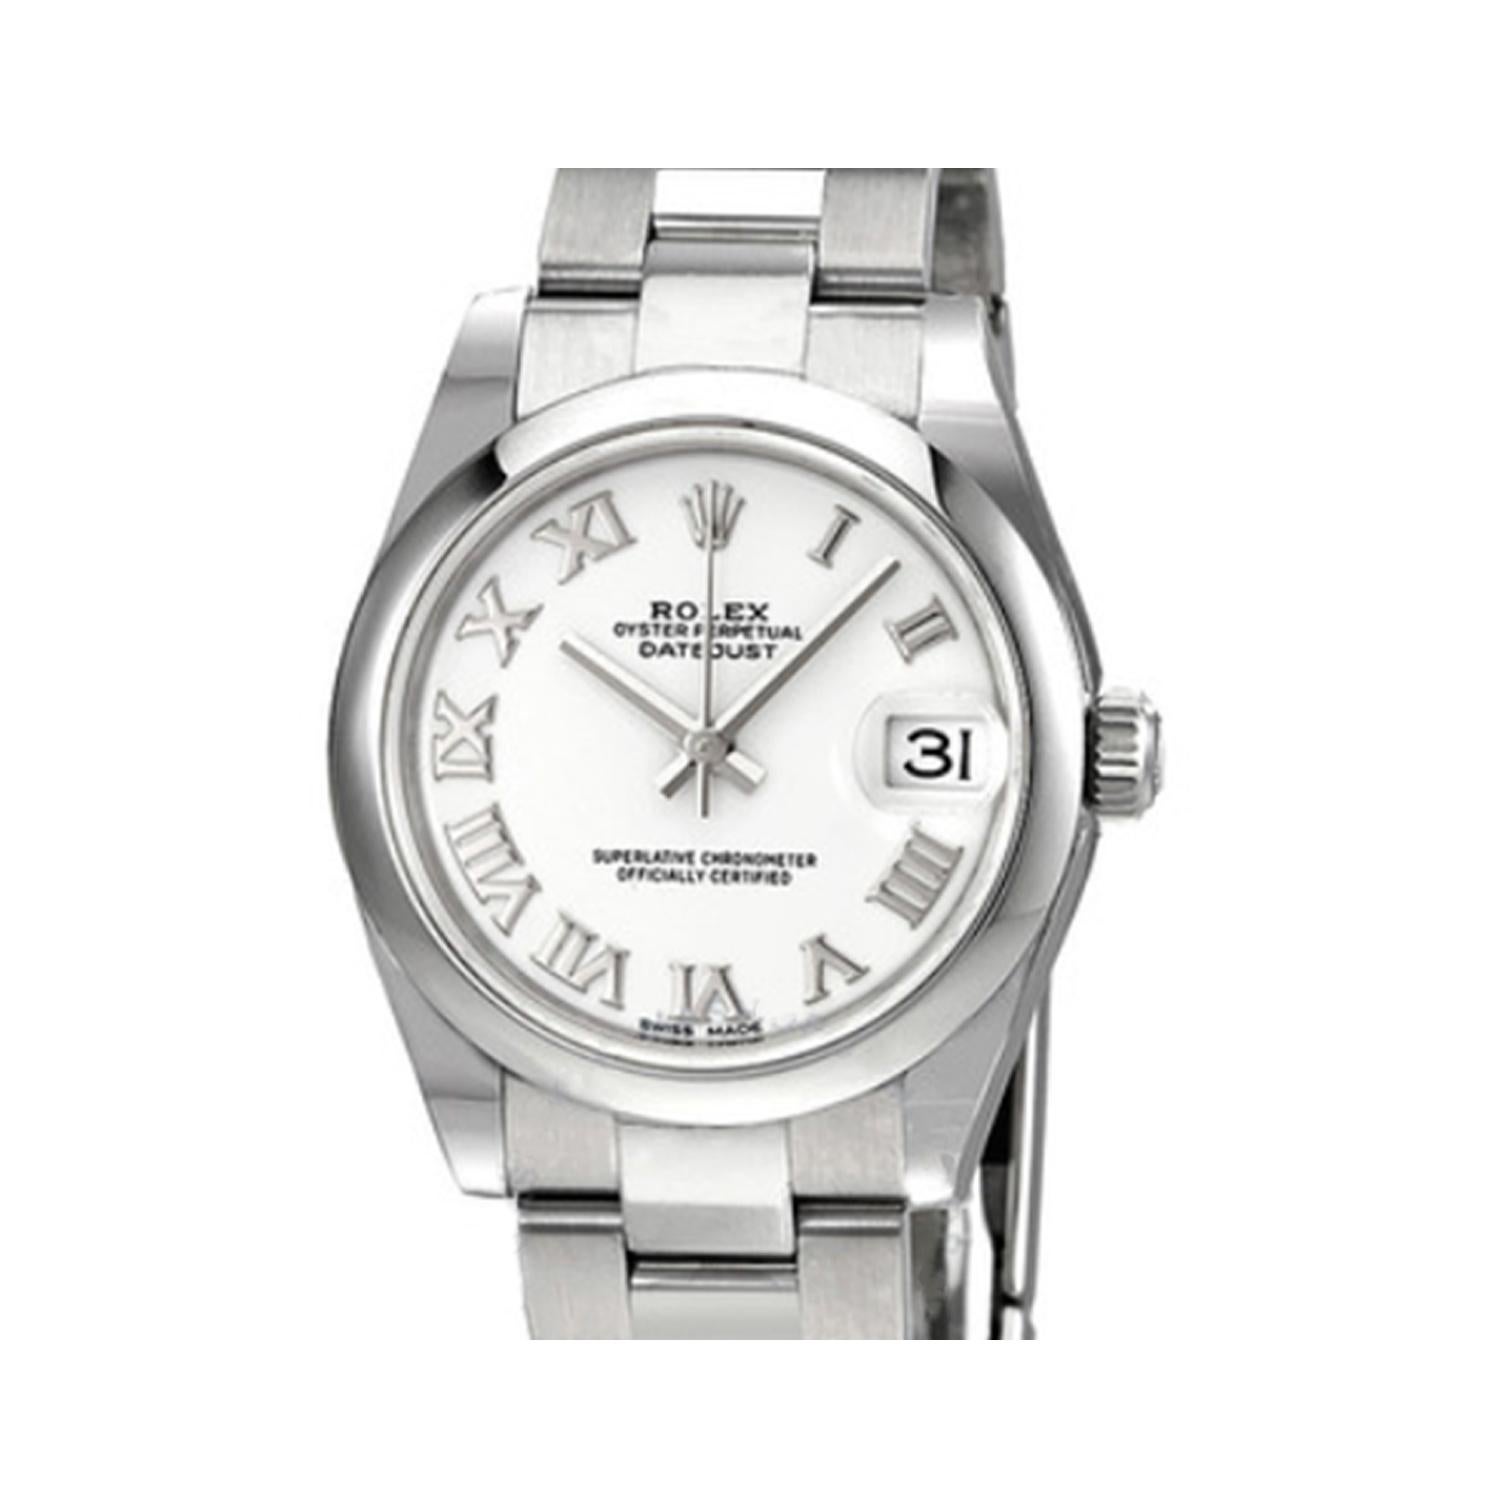 This brand new Rolex Datejust 31 178240 is a beautiful Unisex timepiece that is powered by mechanical (automatic) movement which is cased in a stainless steel case. It has a round shape face, date indicator dial and has hand roman numerals style